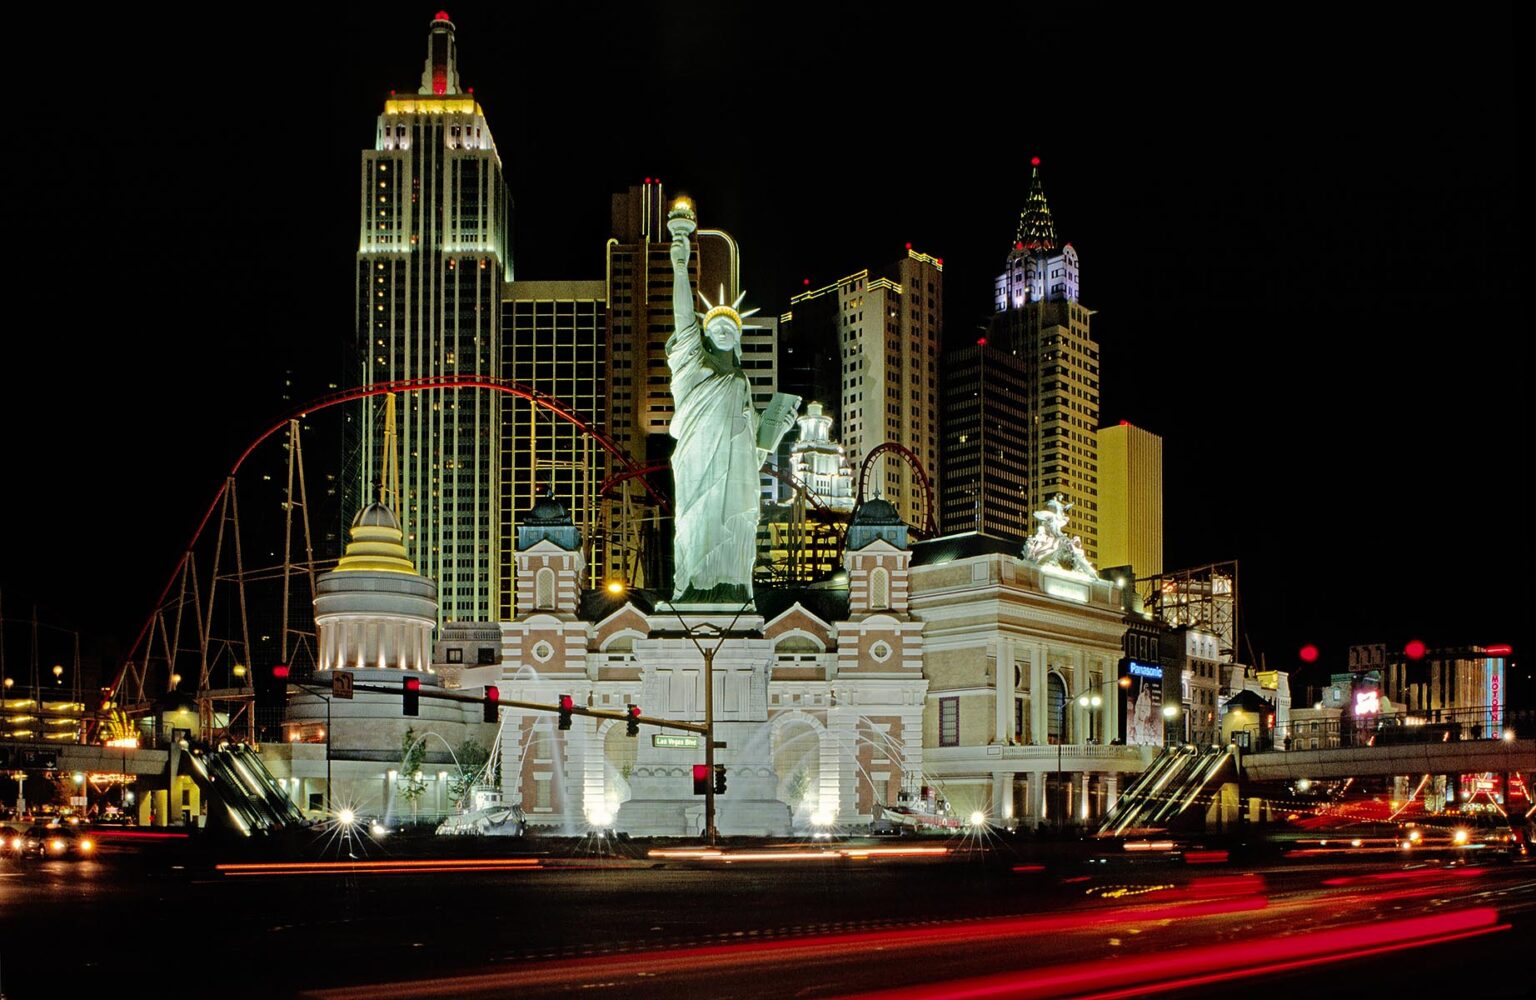 A large replica of the STATUE OF LIBERTY is part of the NEW YORK-NEW YORK HOTEL and CASINO - LAS VEGAS, NEVADA